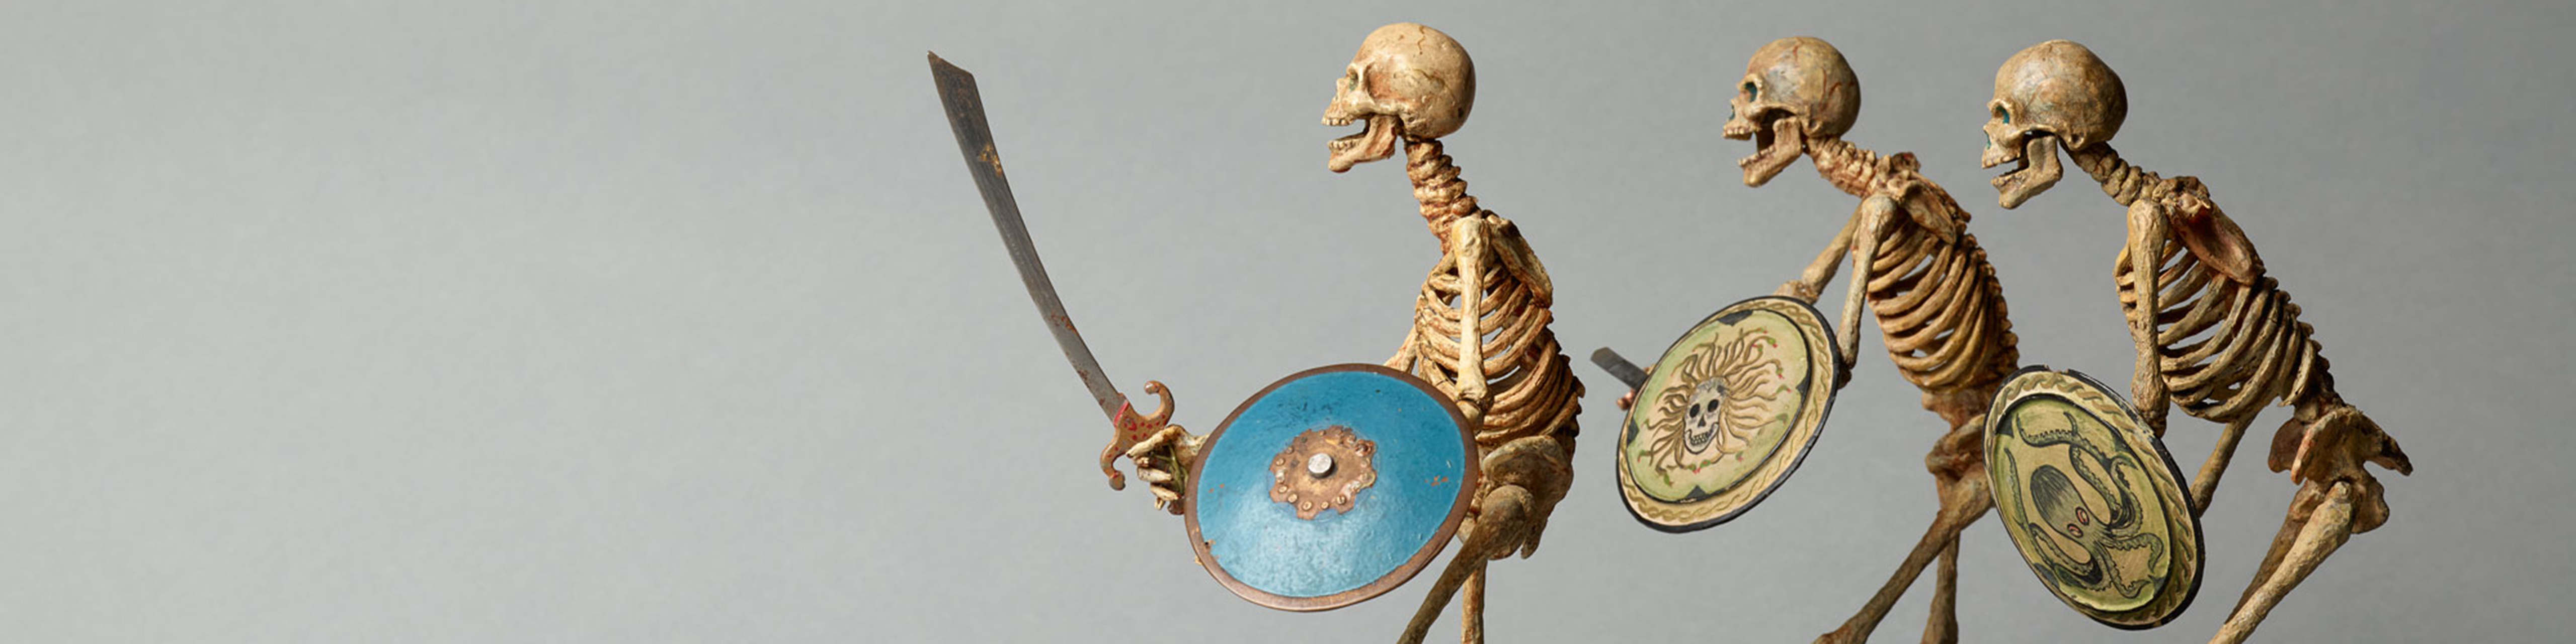 Three model skeletons in a row, holding swords and shields